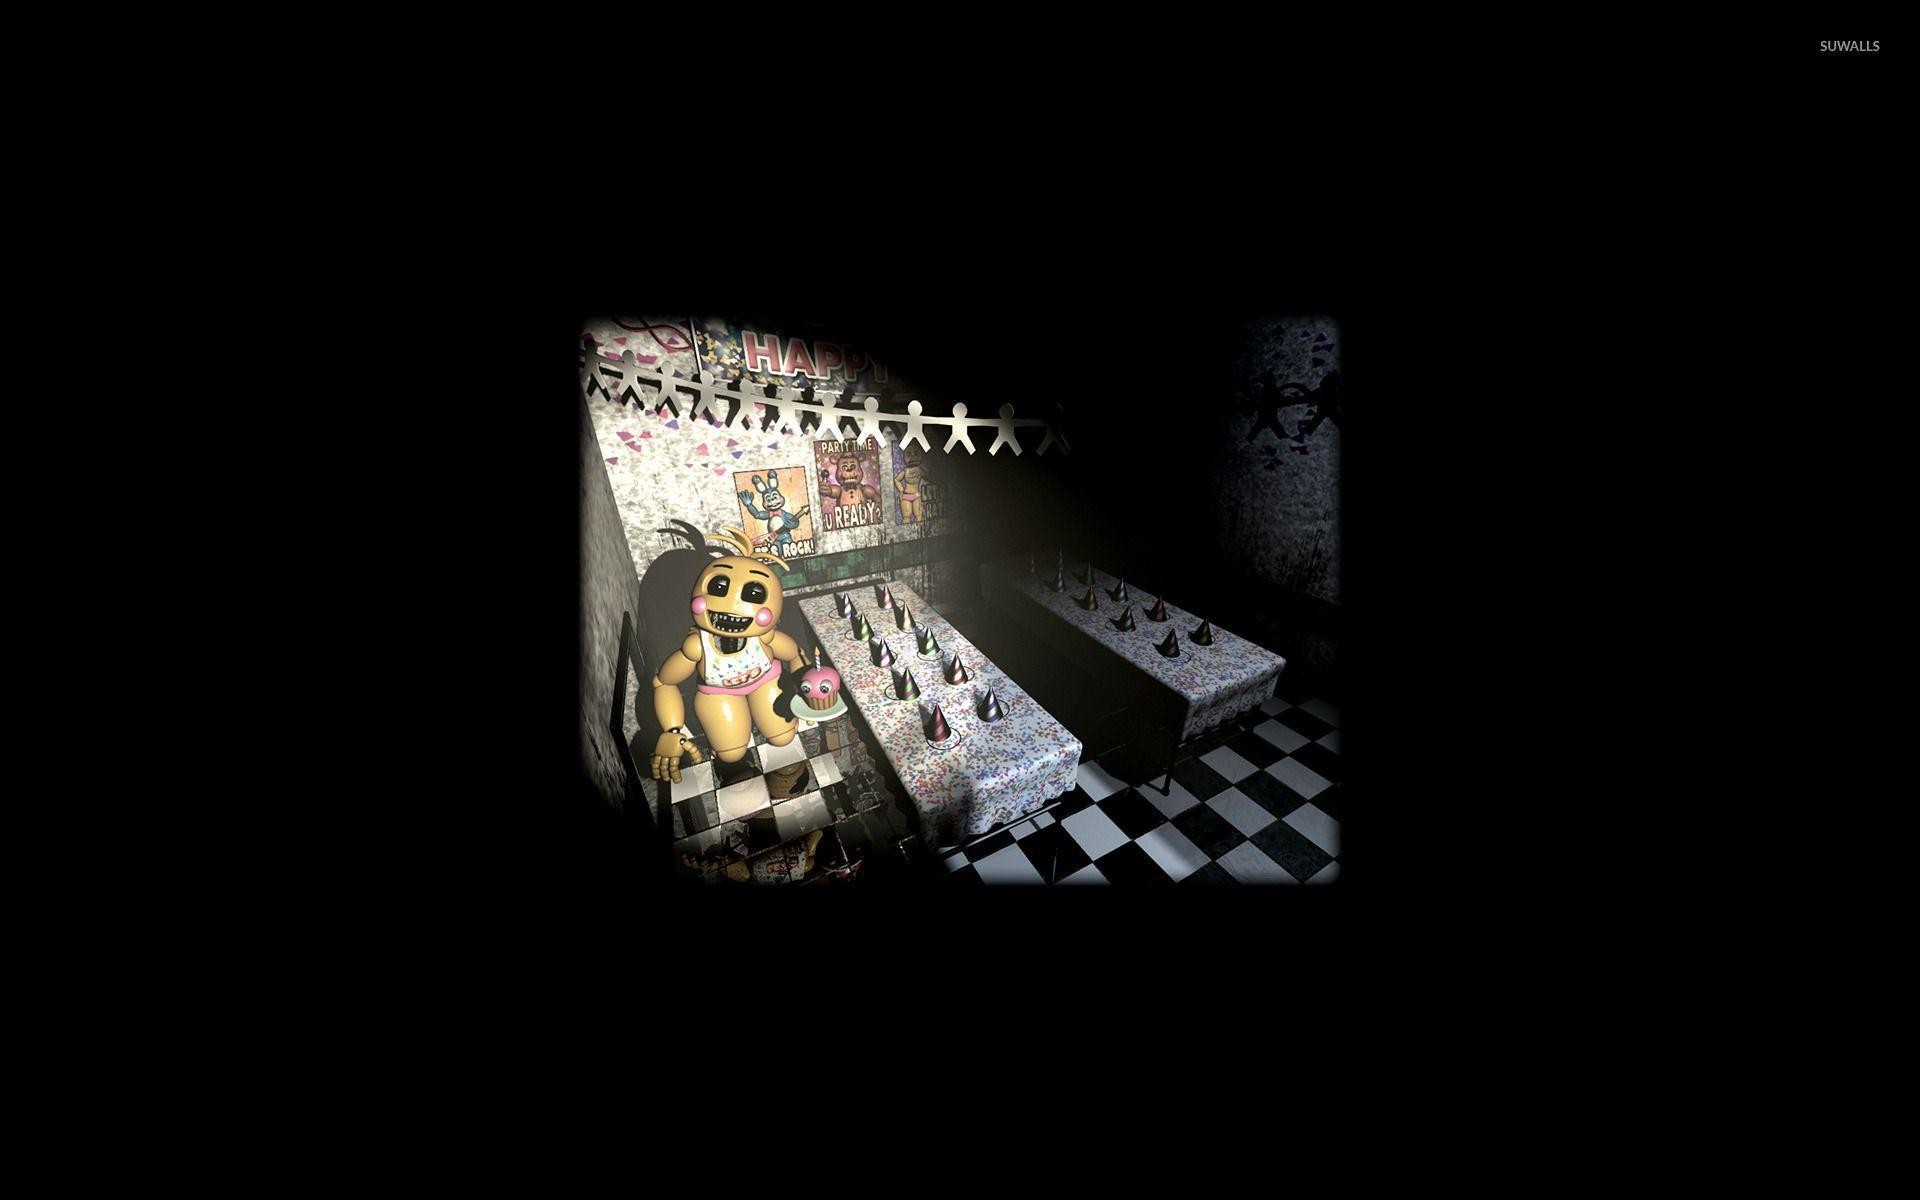 1920x1200 Five Nights at Freddy's wallpaper - Game wallpapers - #35600